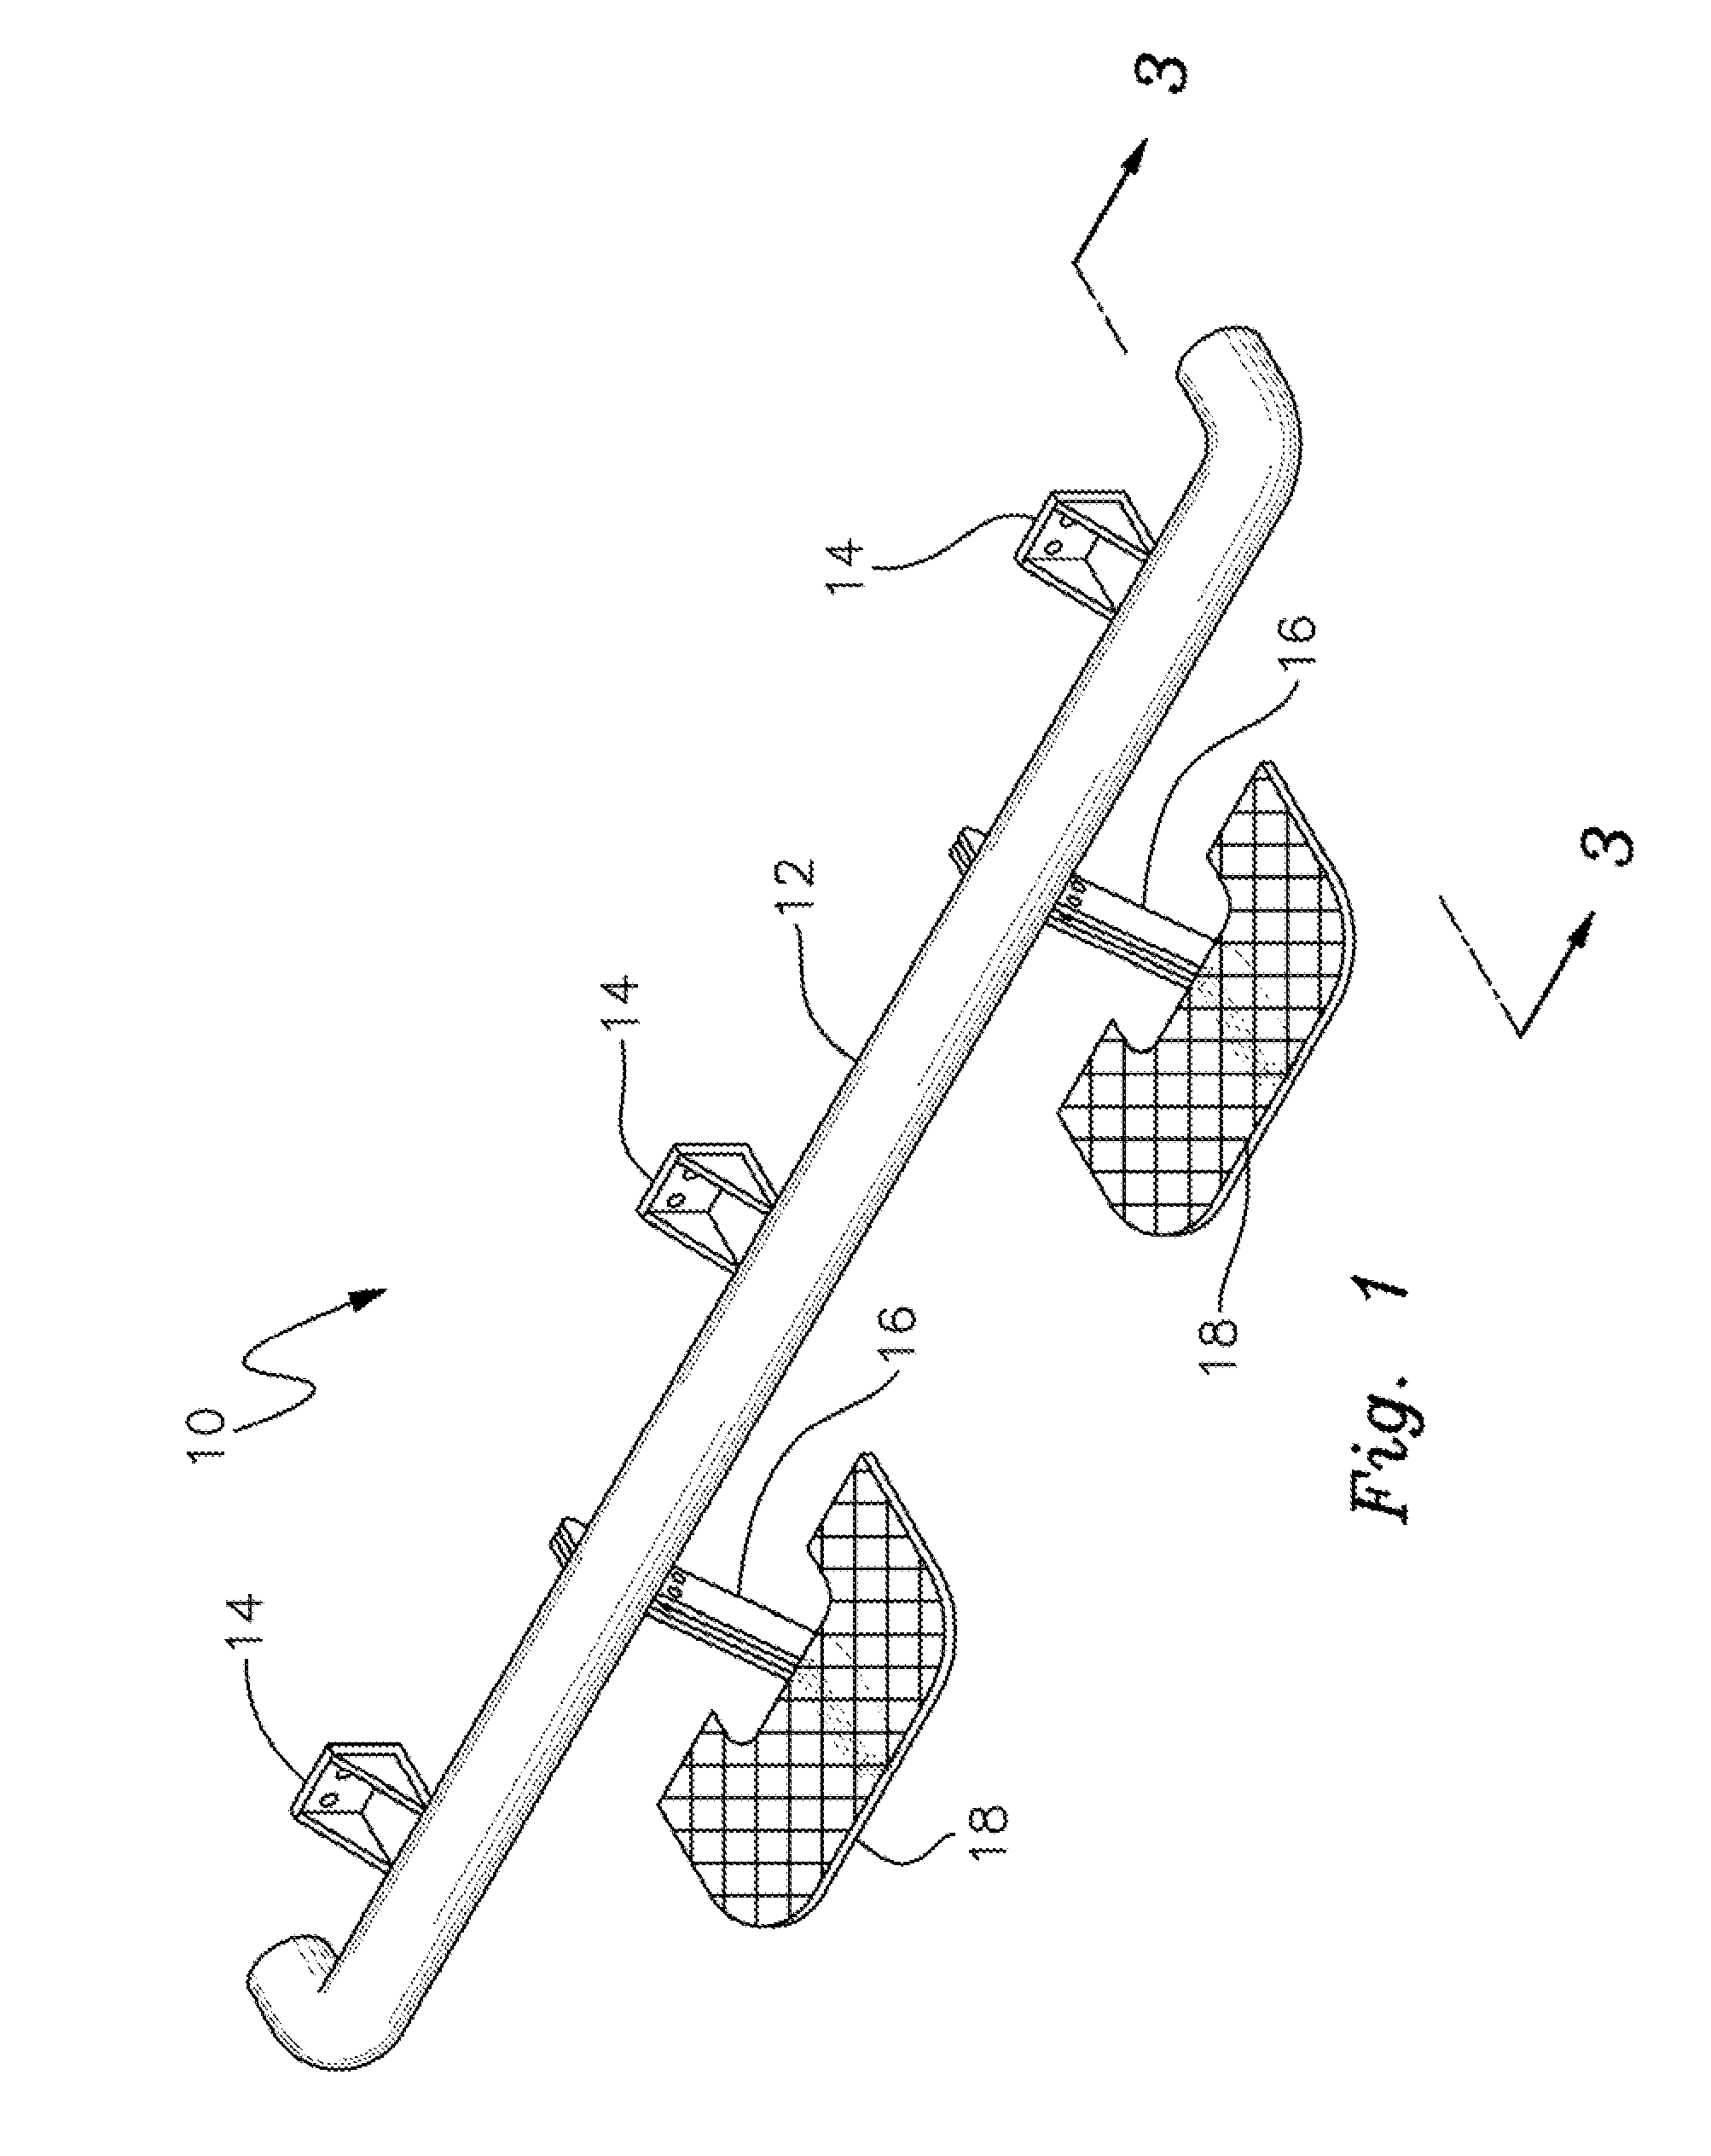 Moveable step for assisting entry into vehicles